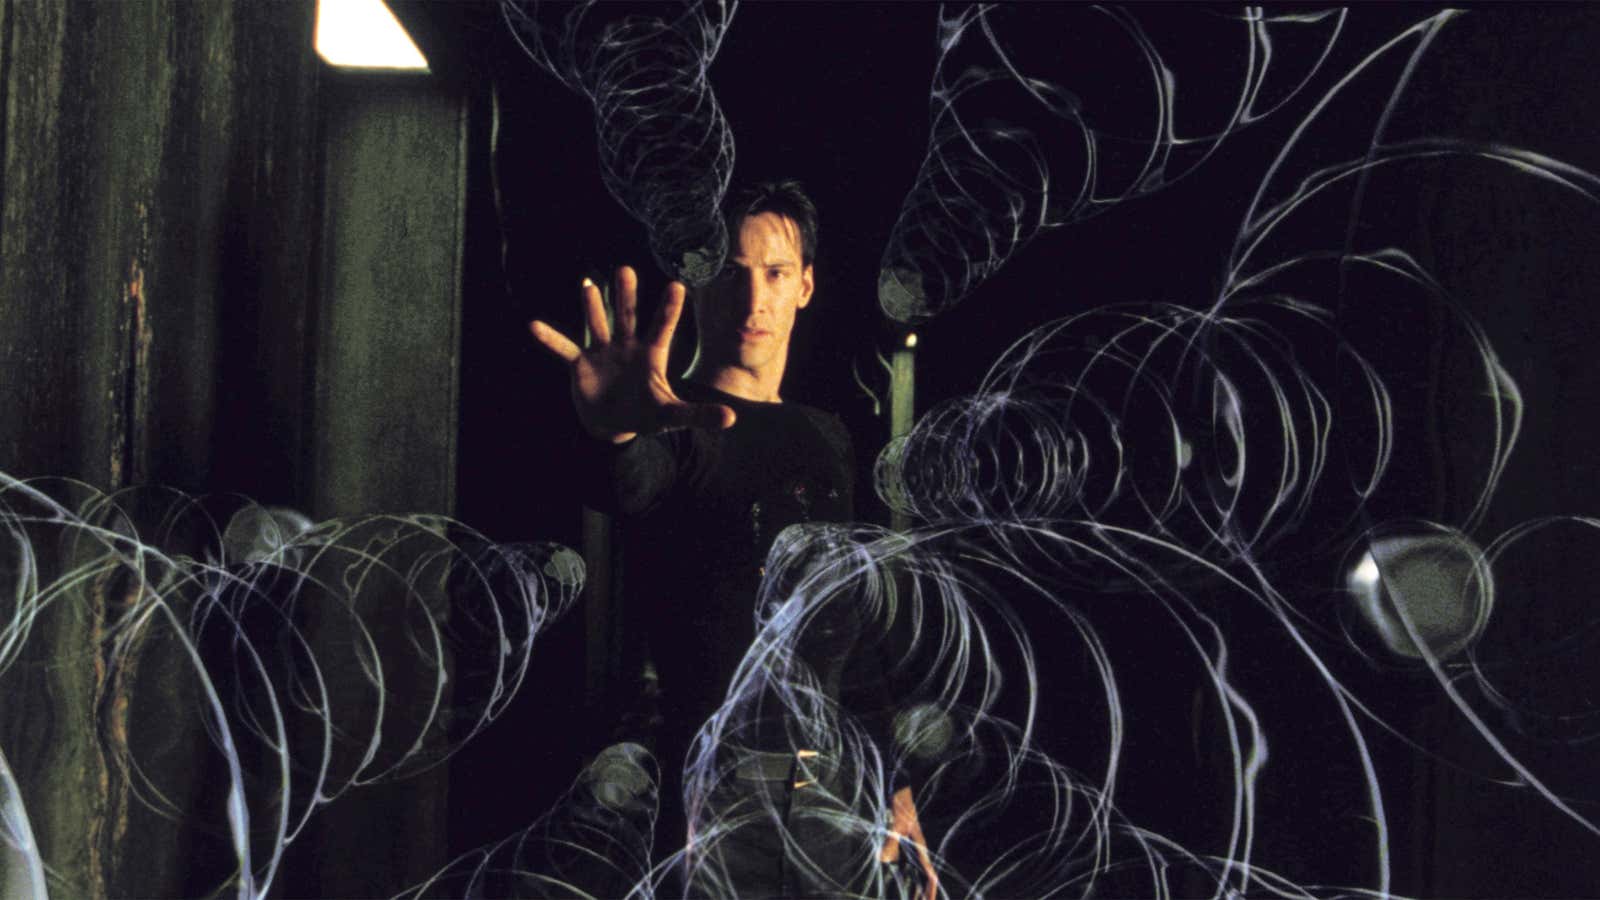 Keanu Reeves as Neo in “The Matrix”